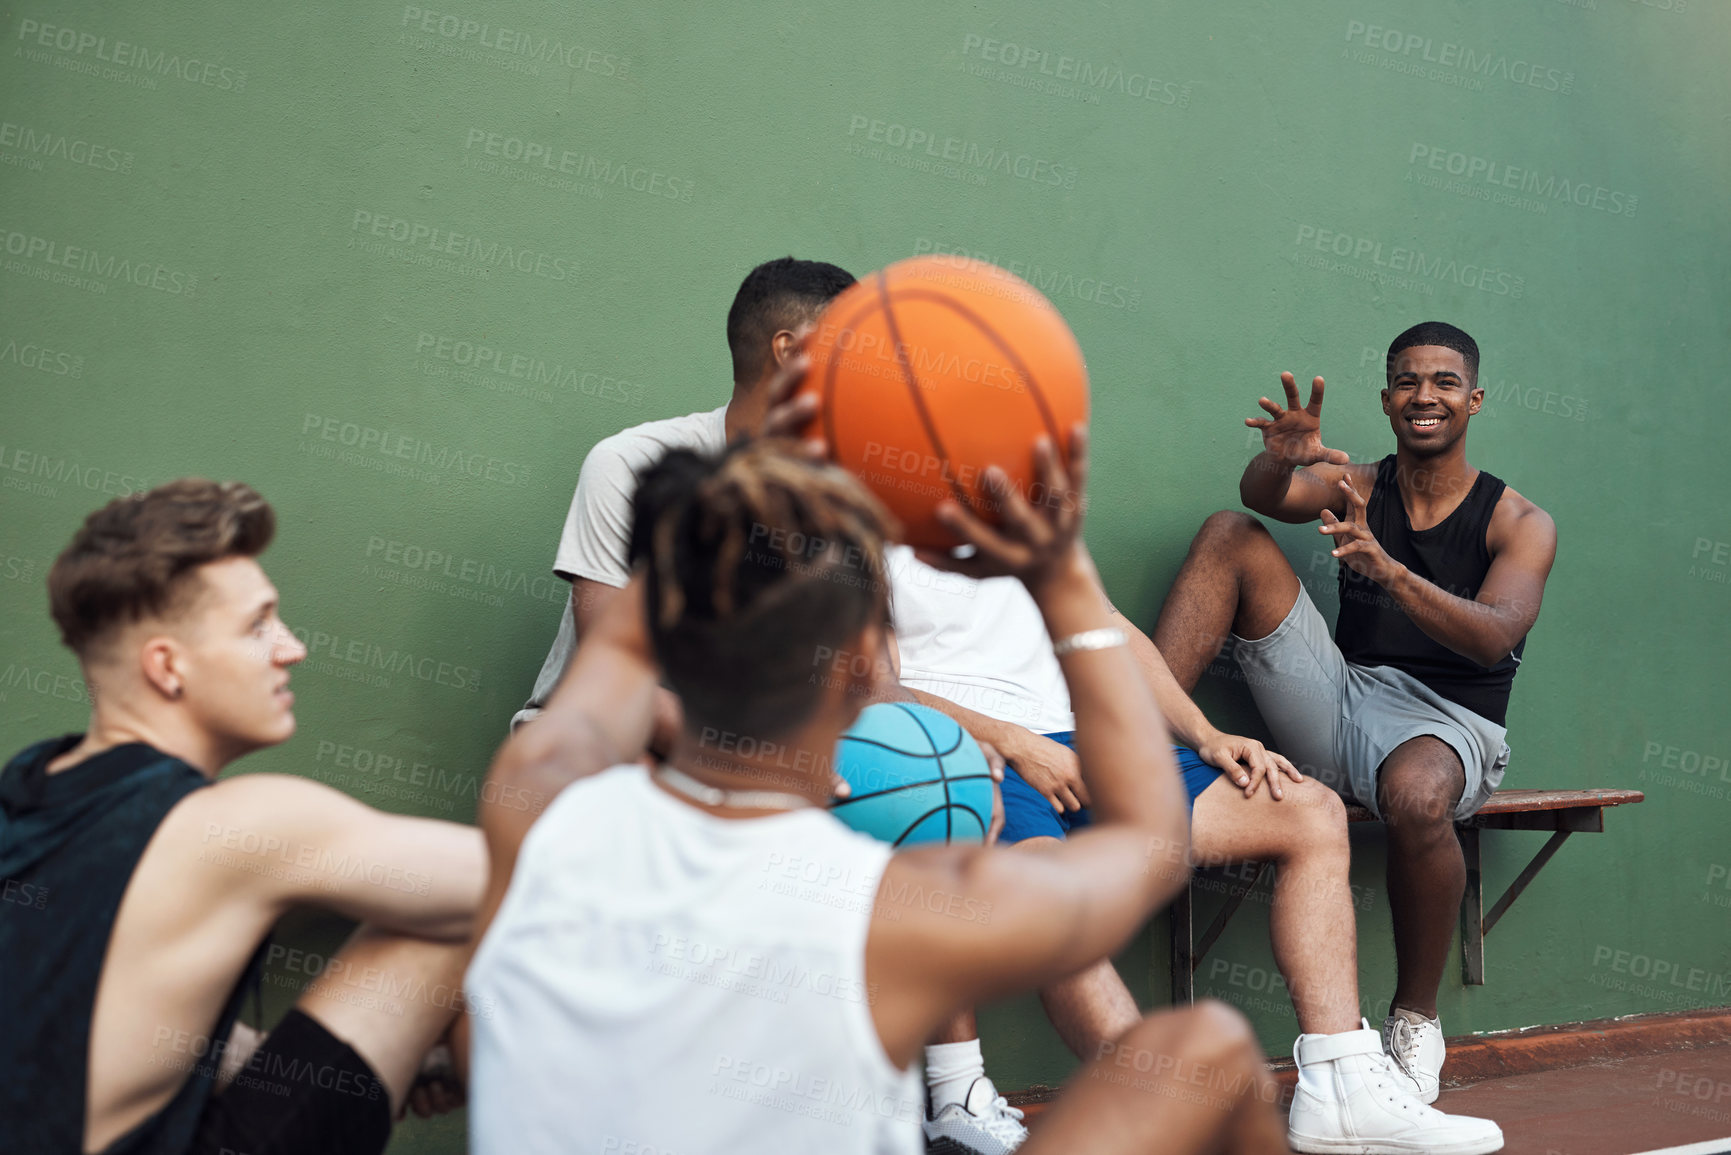 Buy stock photo Shot of a group of sporty young men hanging out on a basketball court